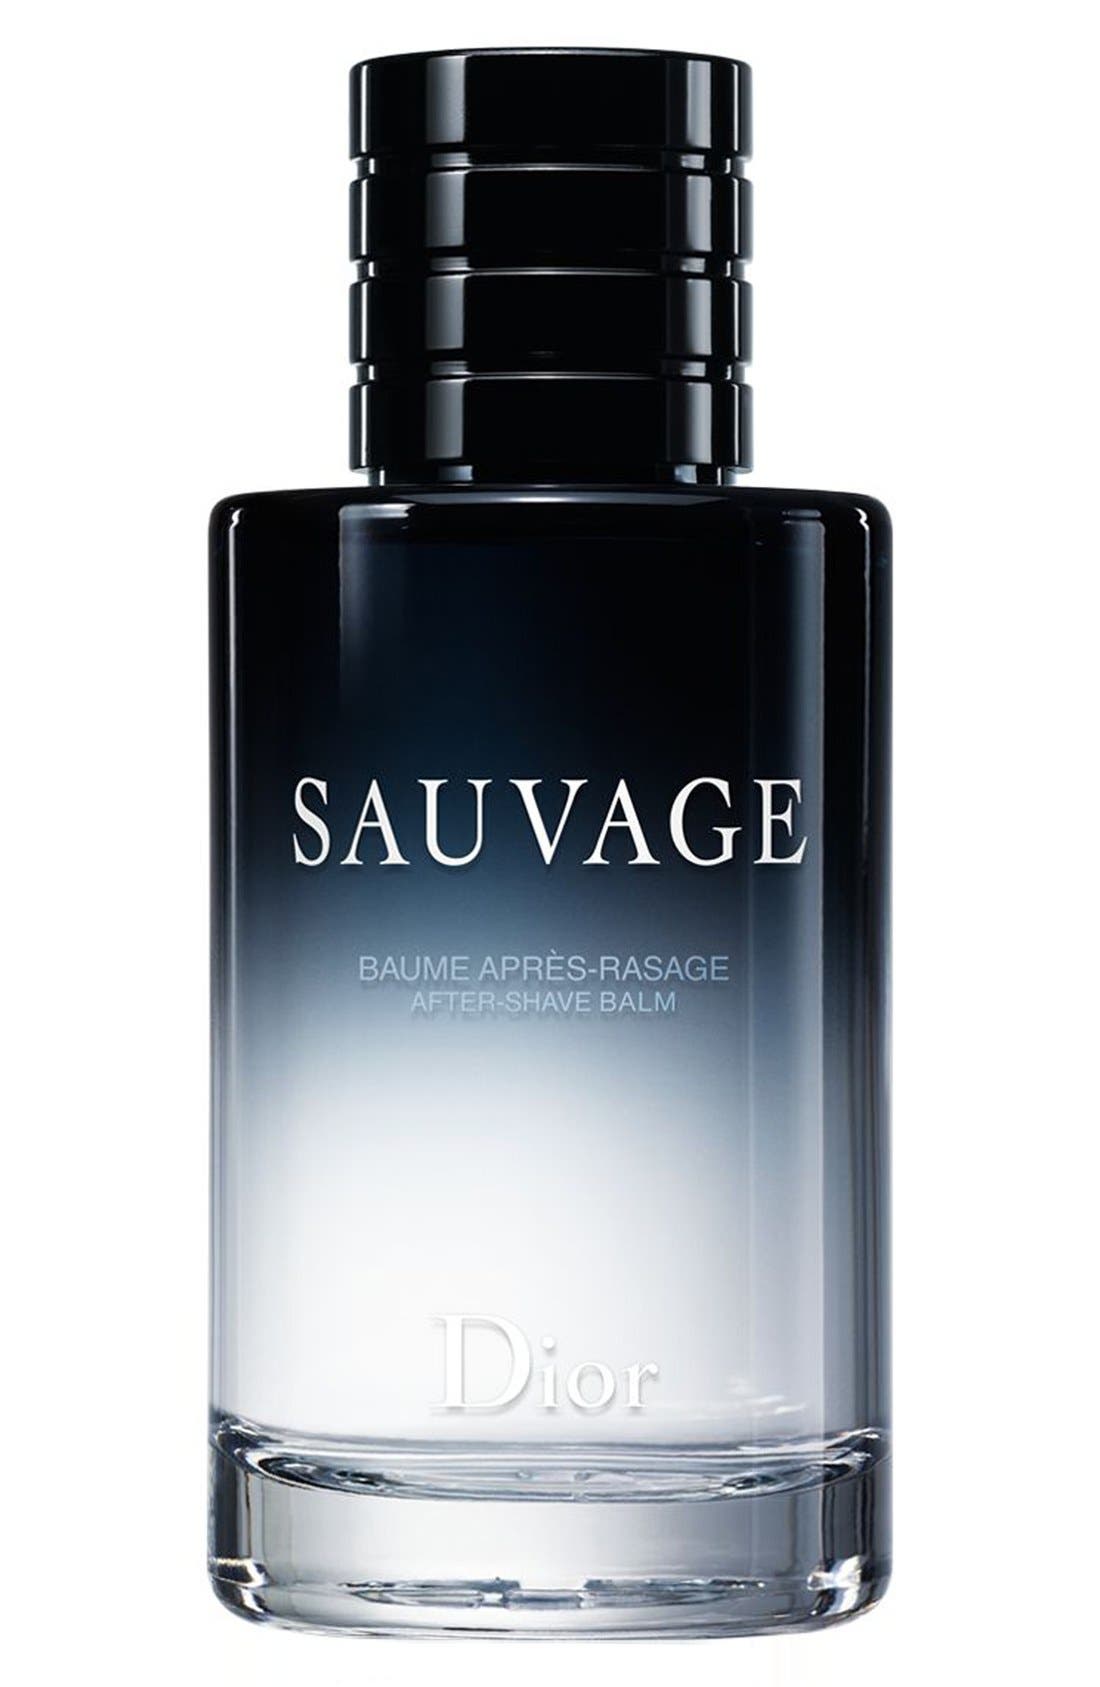 Dior Sauvage After-Shave Balm | Nordstrom